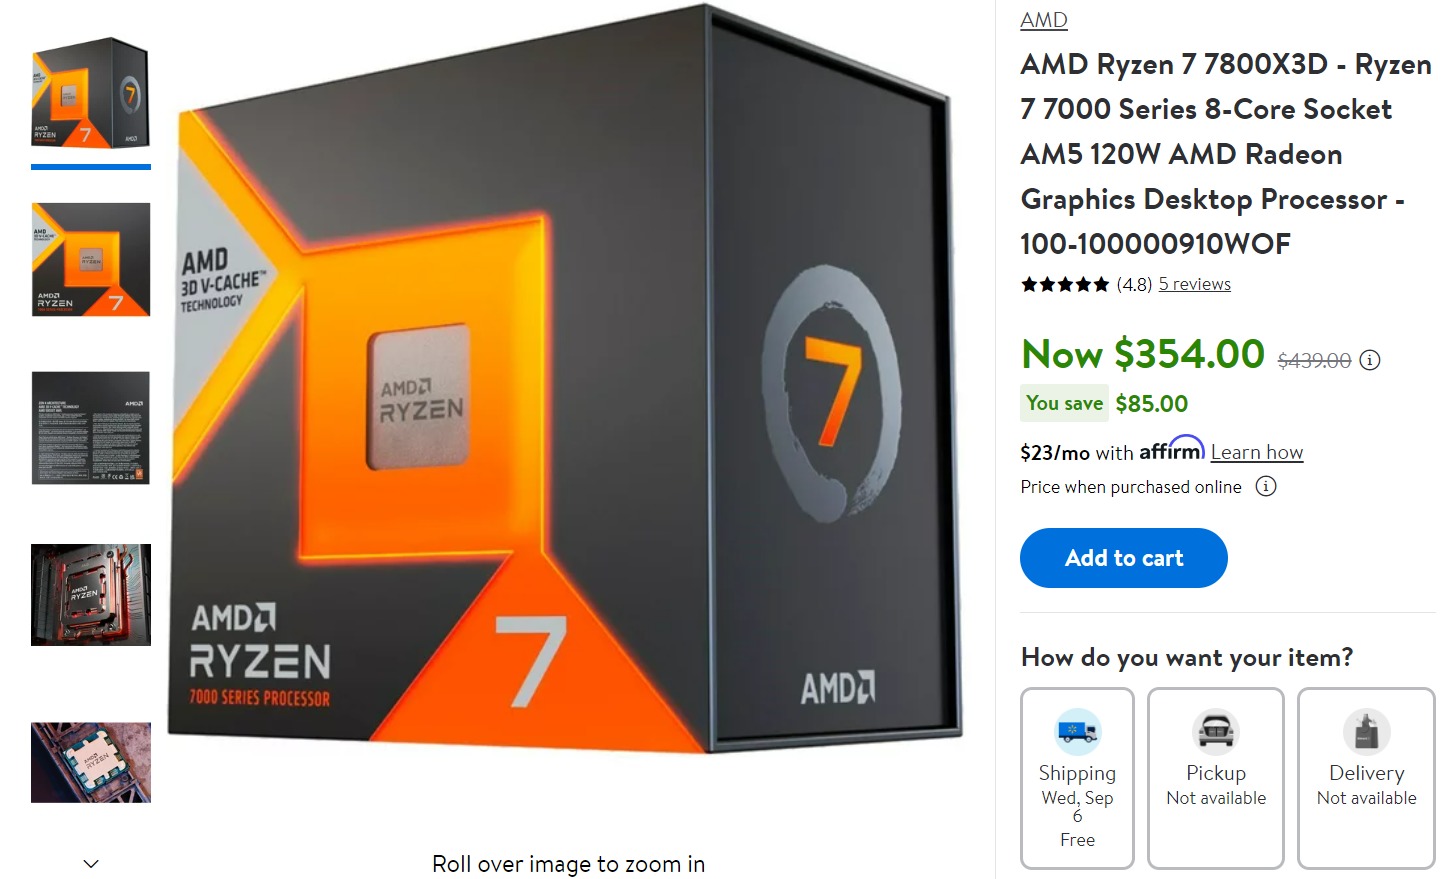 AMD Ryzen 7 7800X3D Is Crazy Popular, Newest 3D V-Cache CPU Sold Almost  Twice As Much As 5800X3D : r/Amd